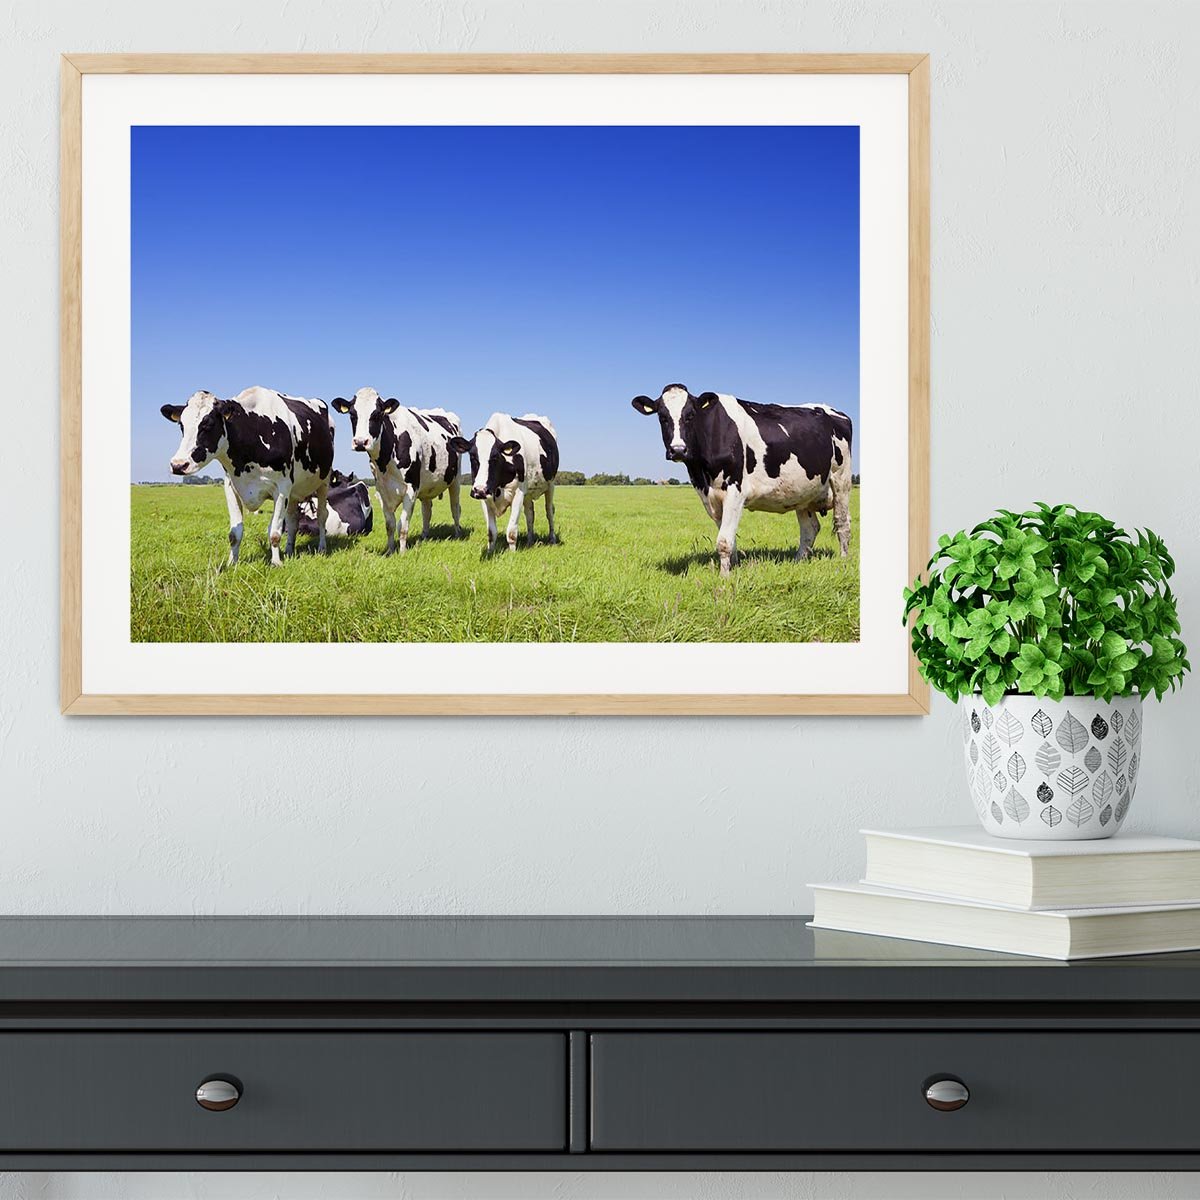 Black and white cows in a grassy field Framed Print - Canvas Art Rocks - 3